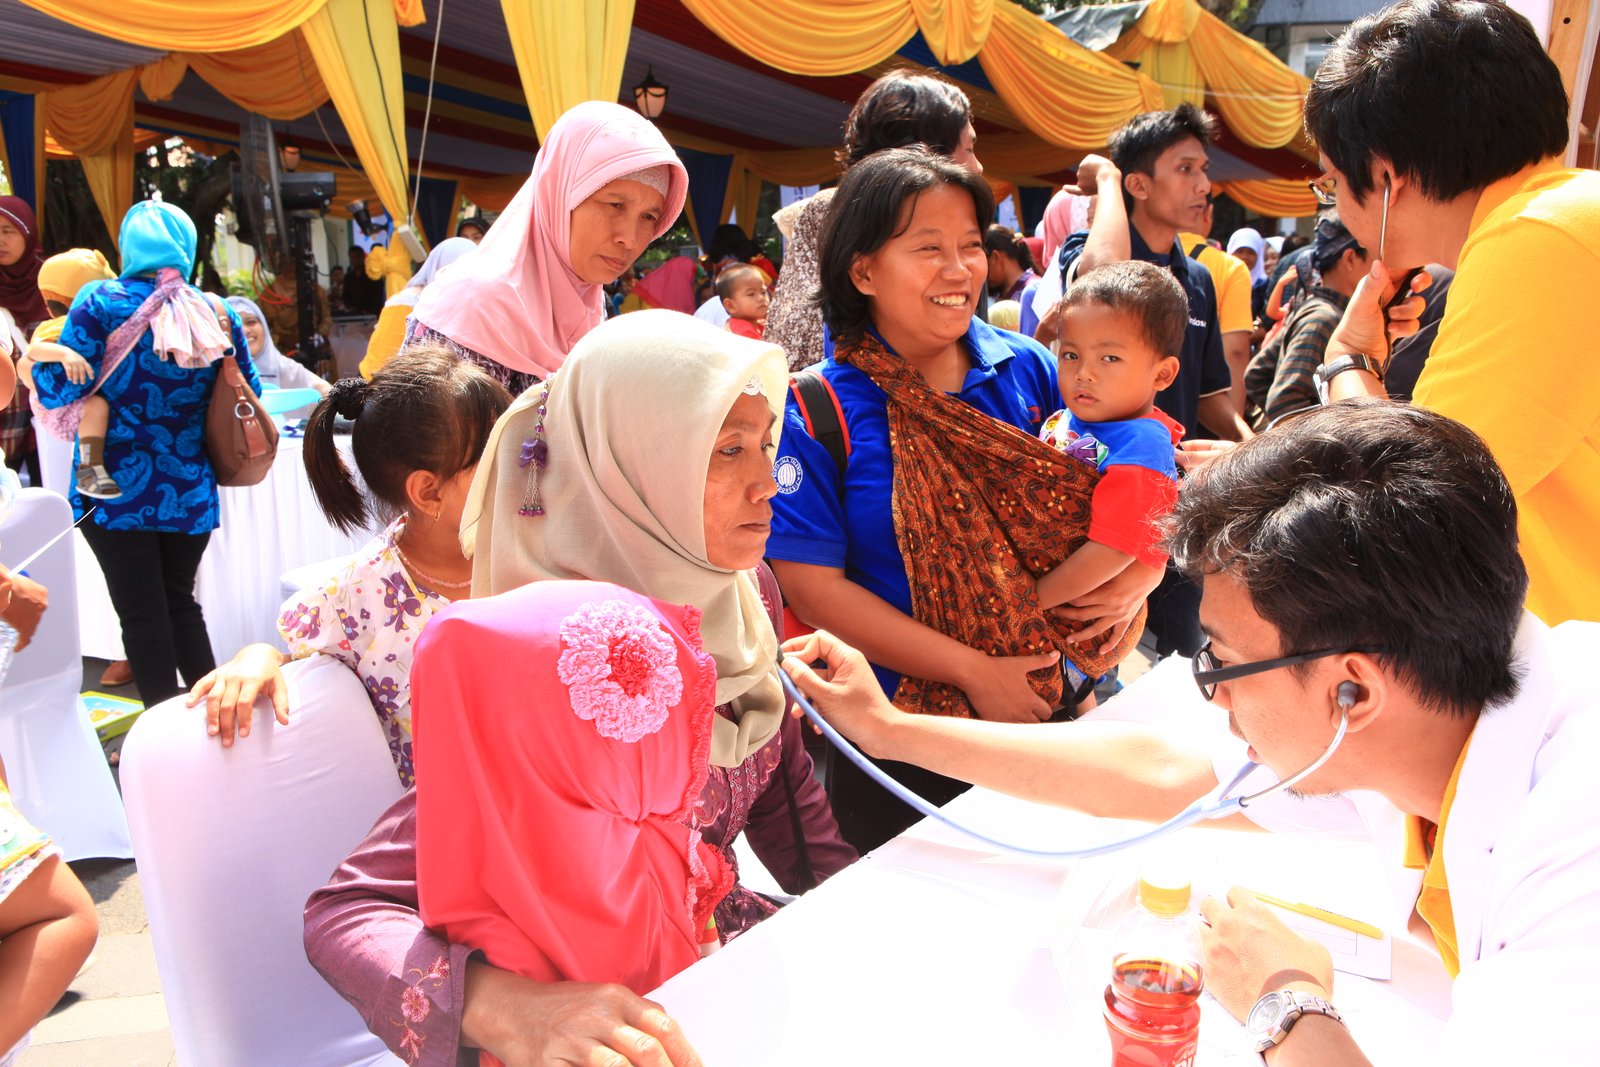 Mobile health clinics in Indonesia